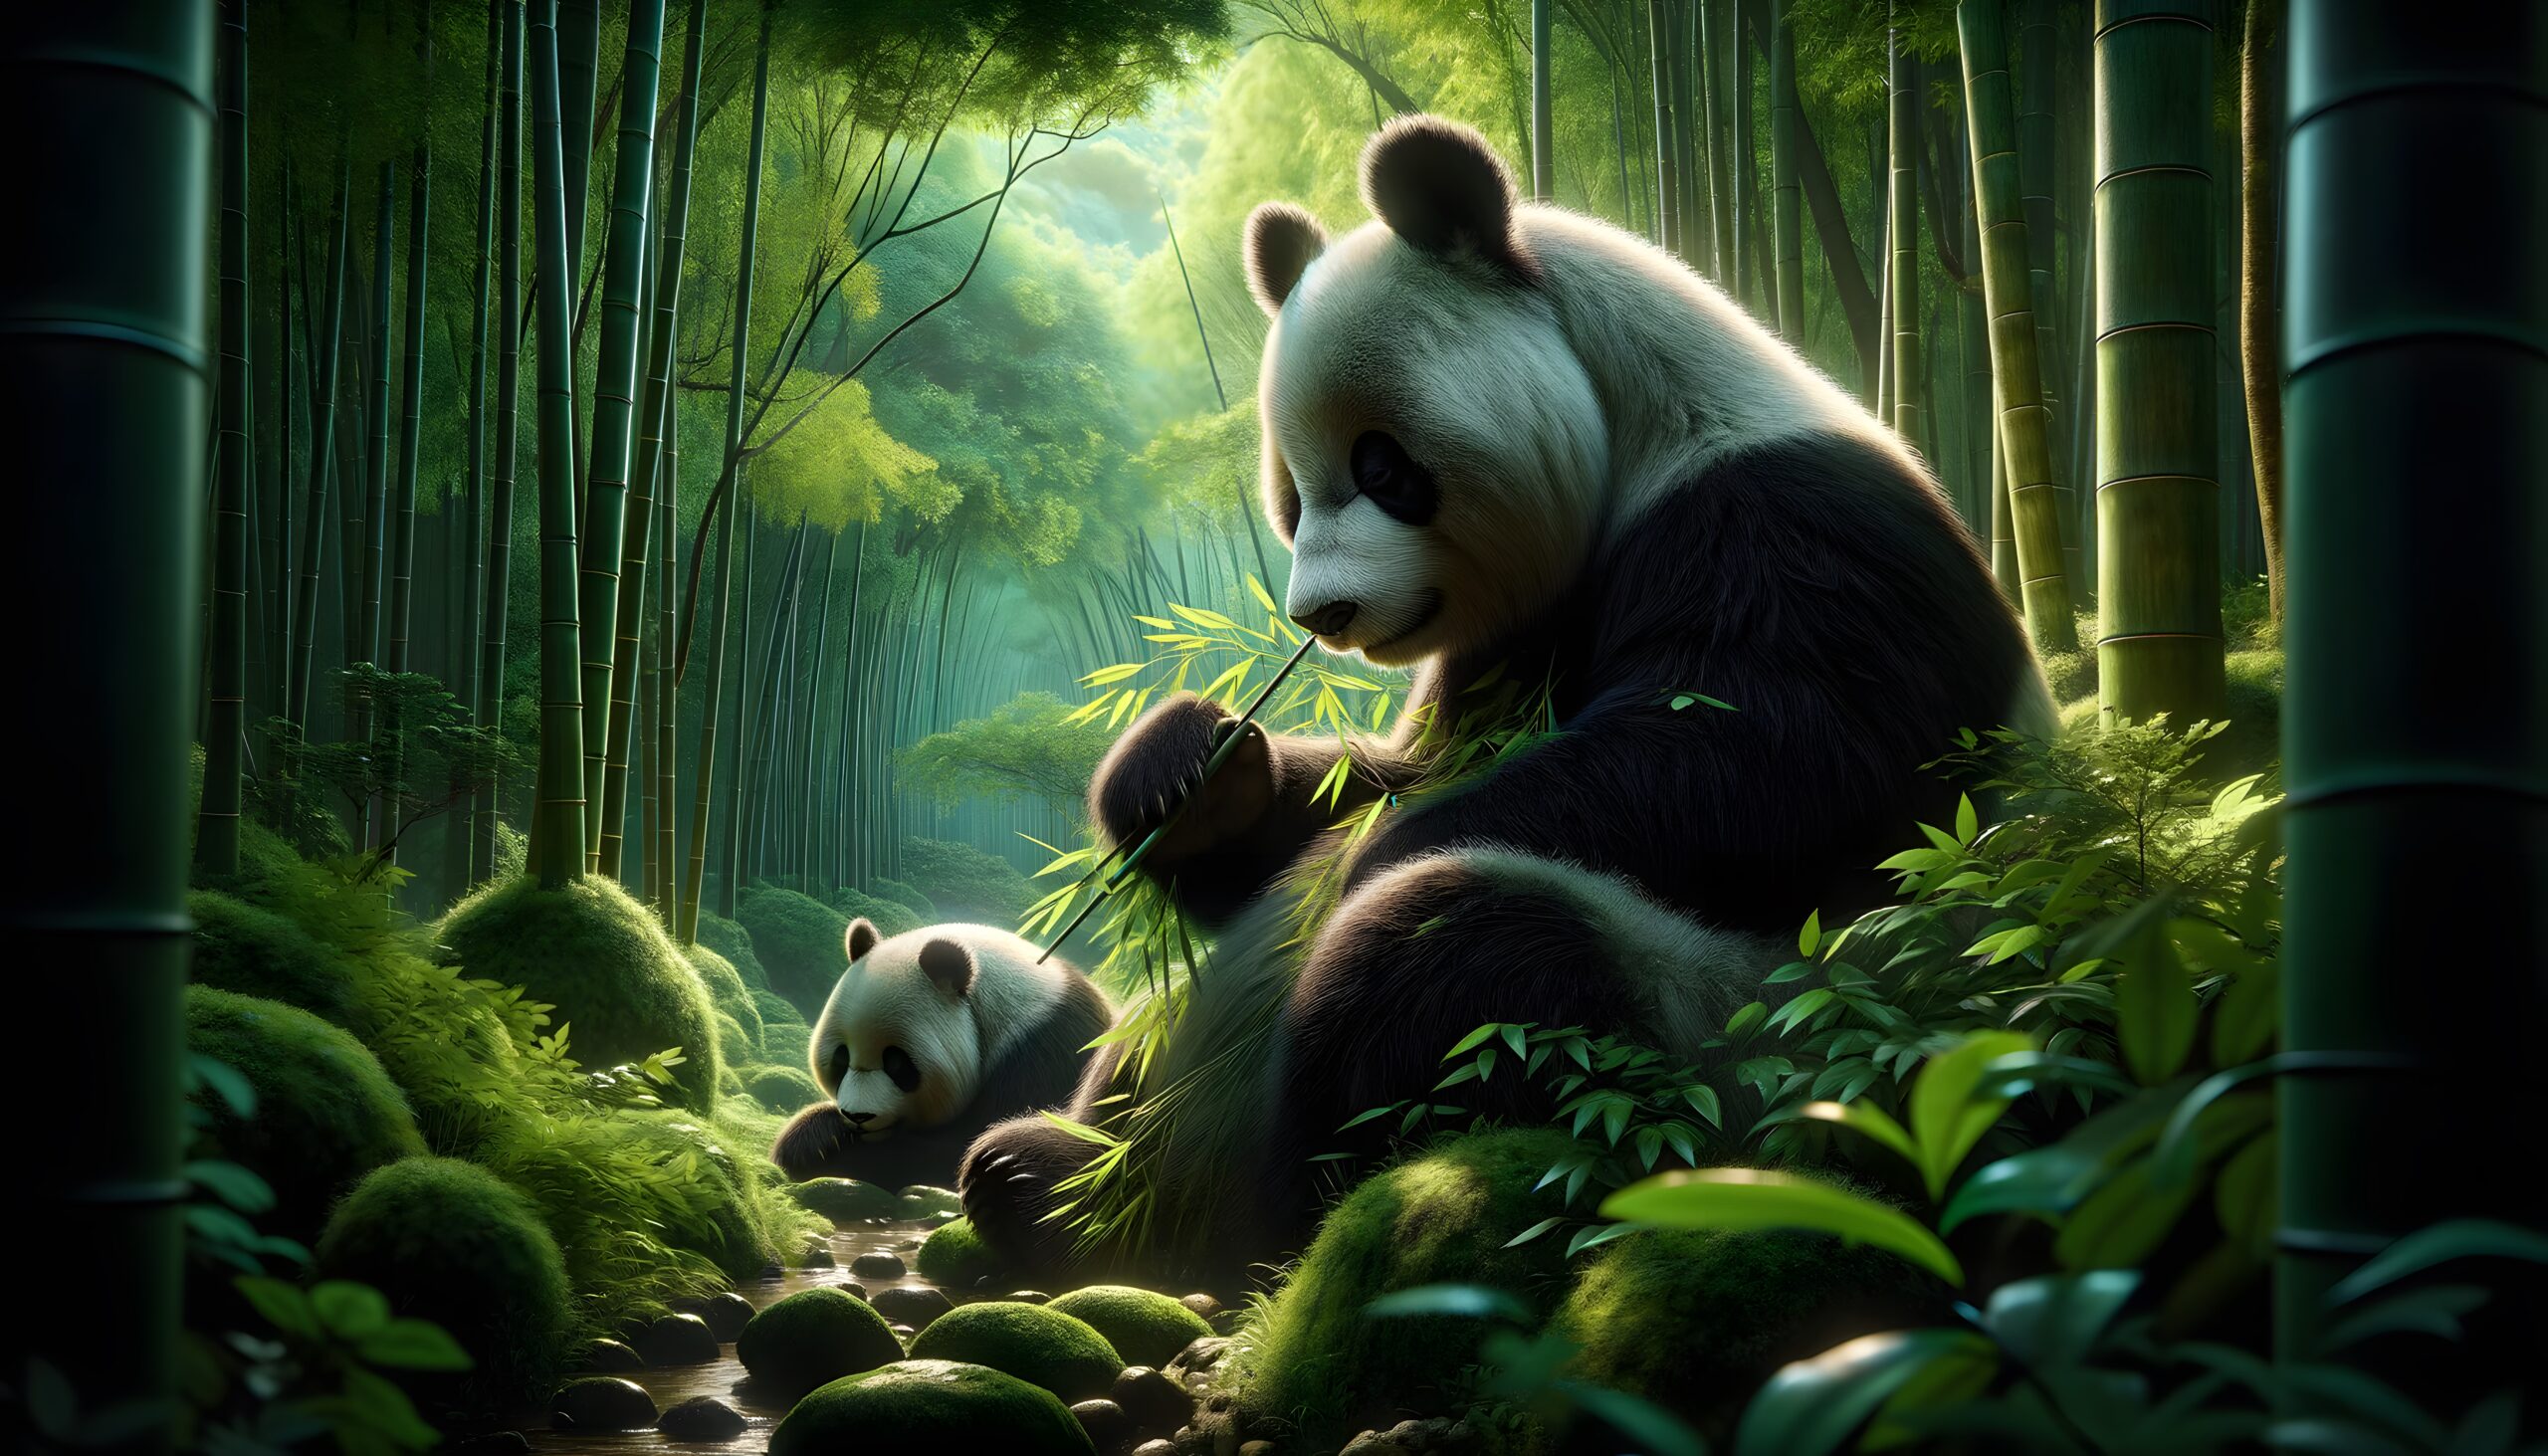 Giant Pandas in their bamboo forest habitat 001